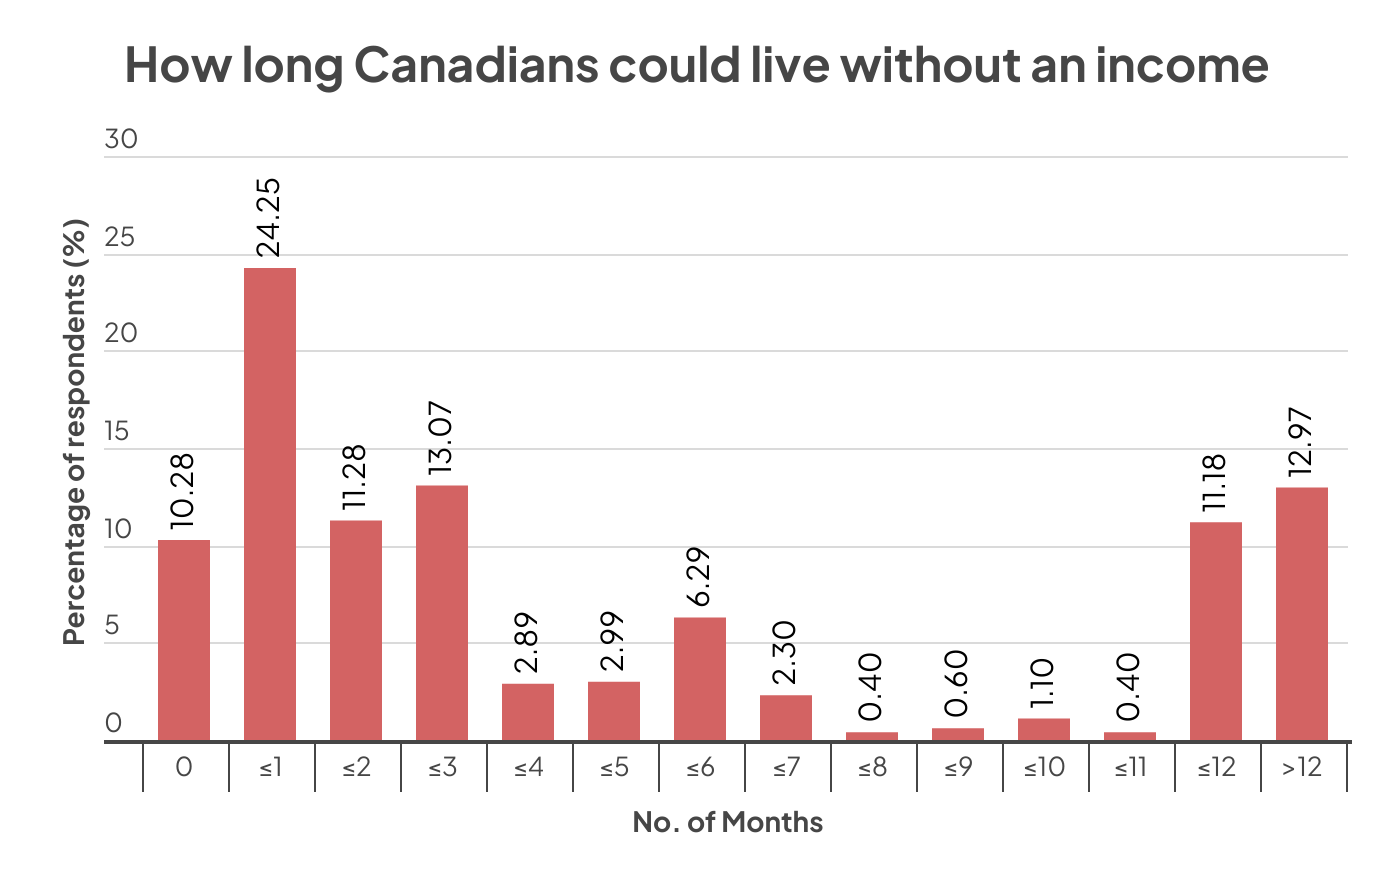 How long people could live without an income graph Canada